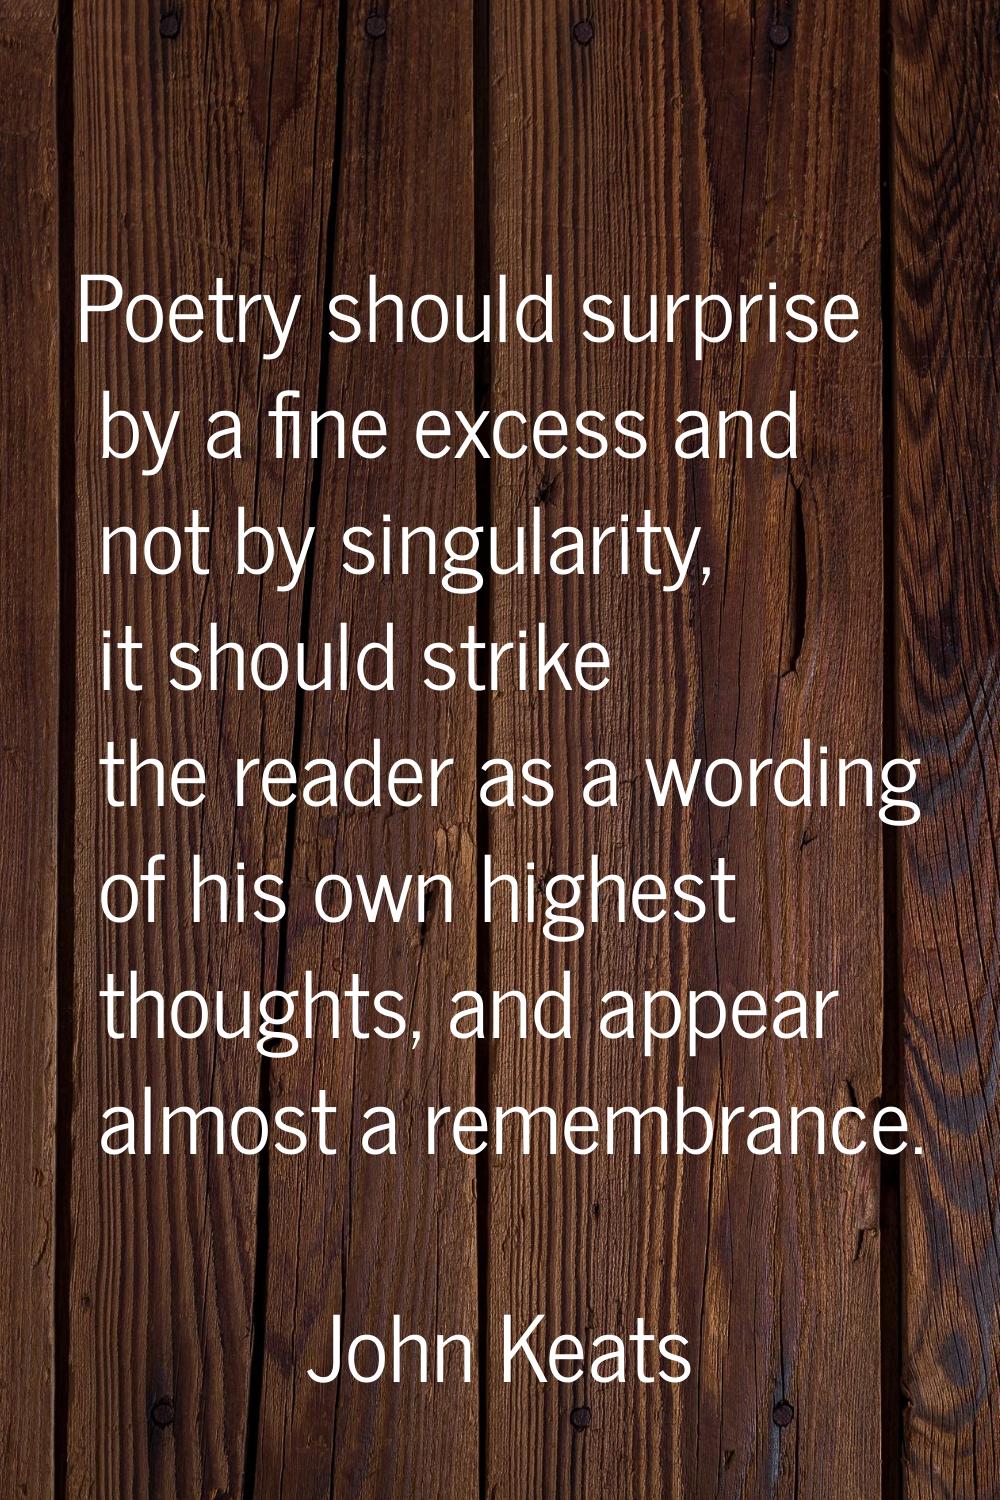 Poetry should surprise by a fine excess and not by singularity, it should strike the reader as a wo